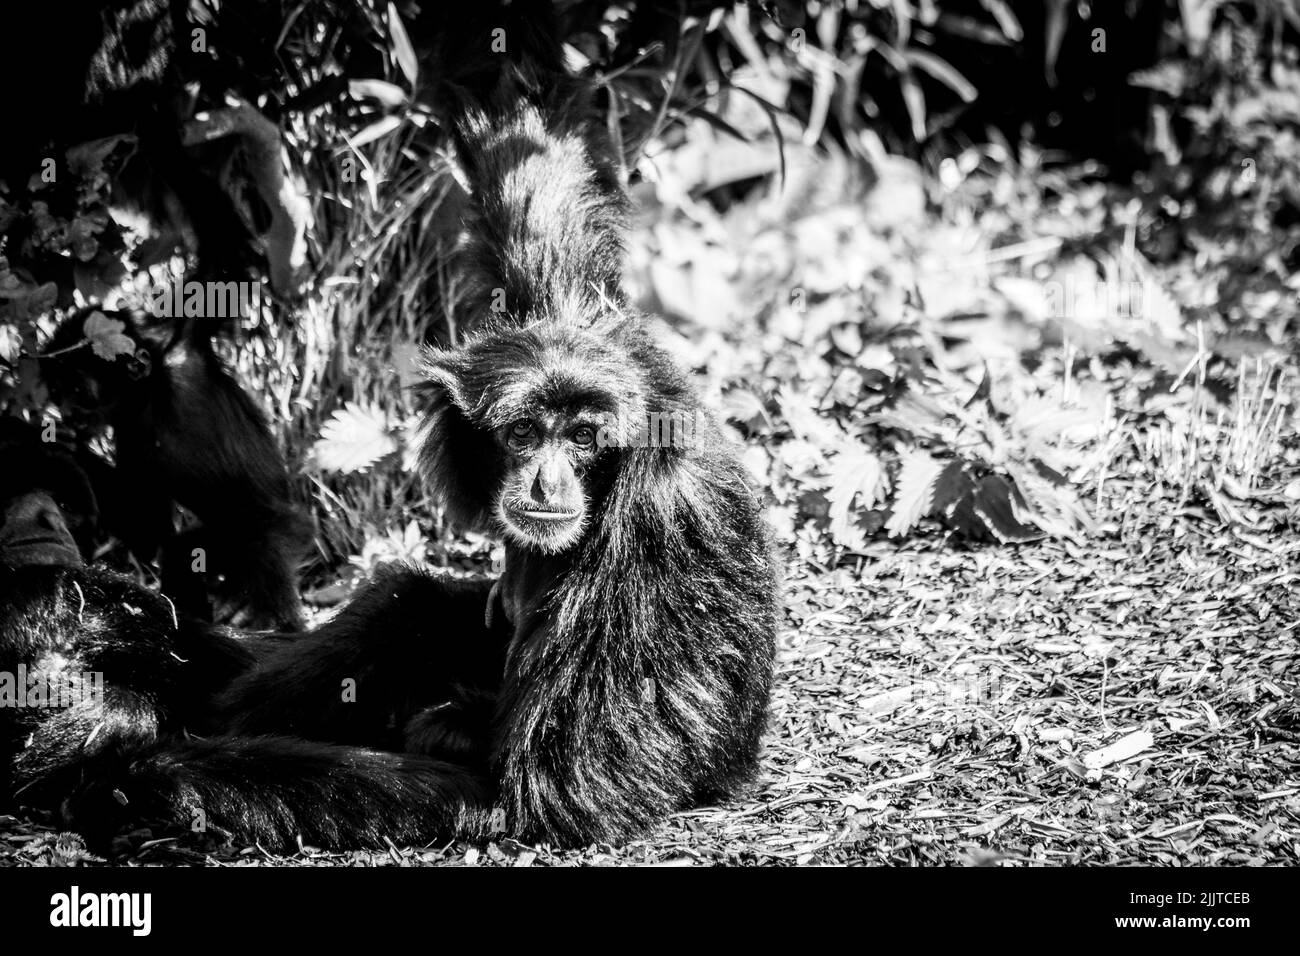 A black and white of a small chimpanzee sitting on a grass Stock Photo